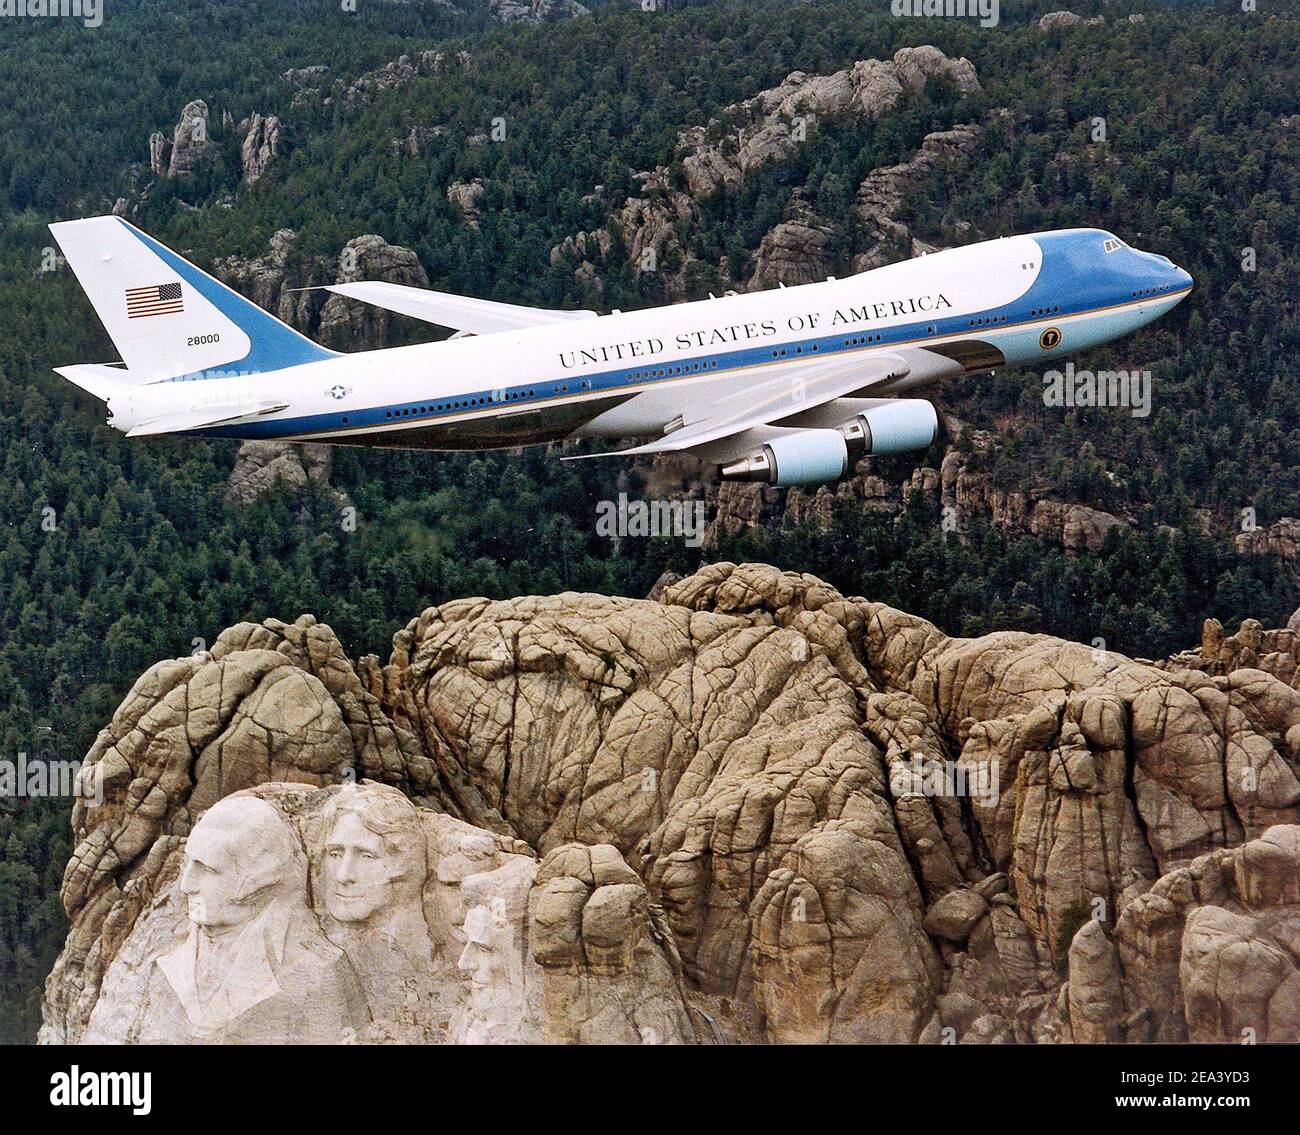 'Air Force One', the U.S. President's aircraft. Principal differences between the VC-25A and the standard Boeing 747, other than the number of passengers carried, are the electronic and communications equipment aboard Air Force One, its interior configuration and furnishings, self-contained baggage loader, front and after-stairs, and the capability for in-flight refueling. These aircrafts are flown by the presidential aircrew, maintained by the presidential maintenance branch, and are assigned to Air Mobility Command's 89th Airlift Wing, Andrews Air Force Base, Md. Photo by USAF/ABACA. Stock Photo